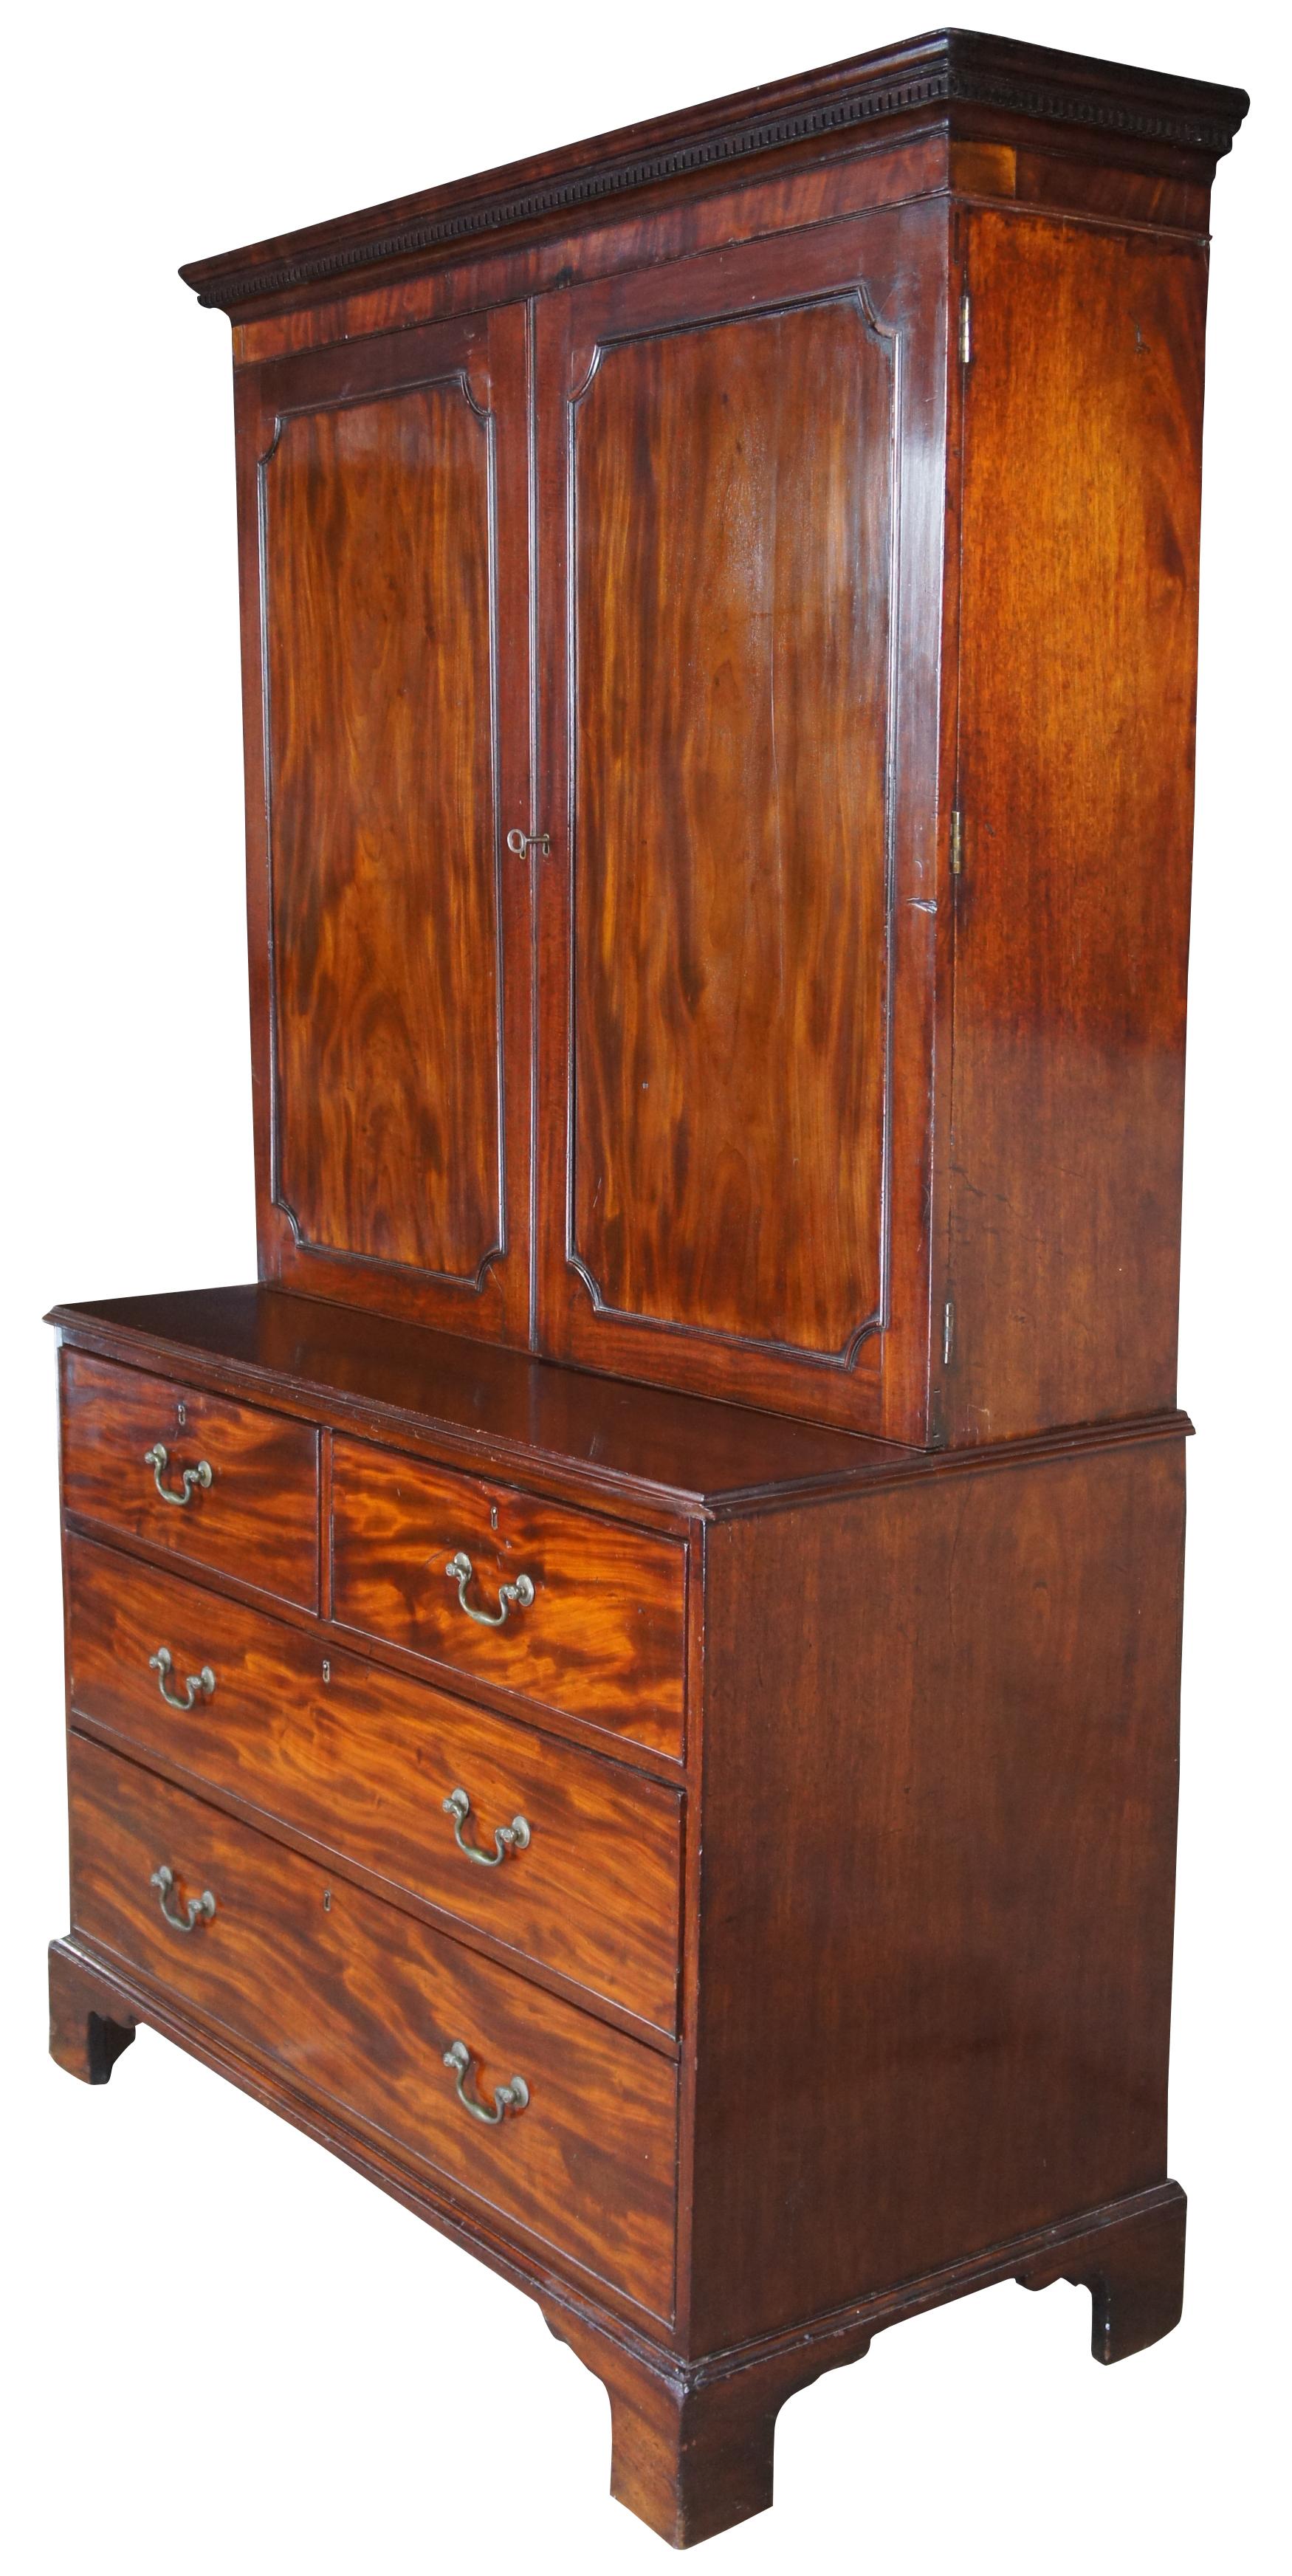 18th century George III English mahogany linen press. Rectangular form with two over three hand dovetailed drawers and stepback closet/wardrobe. Features a carved crown with ogee edge, bracket feet and brass bail hardware.

Measure: Surface height